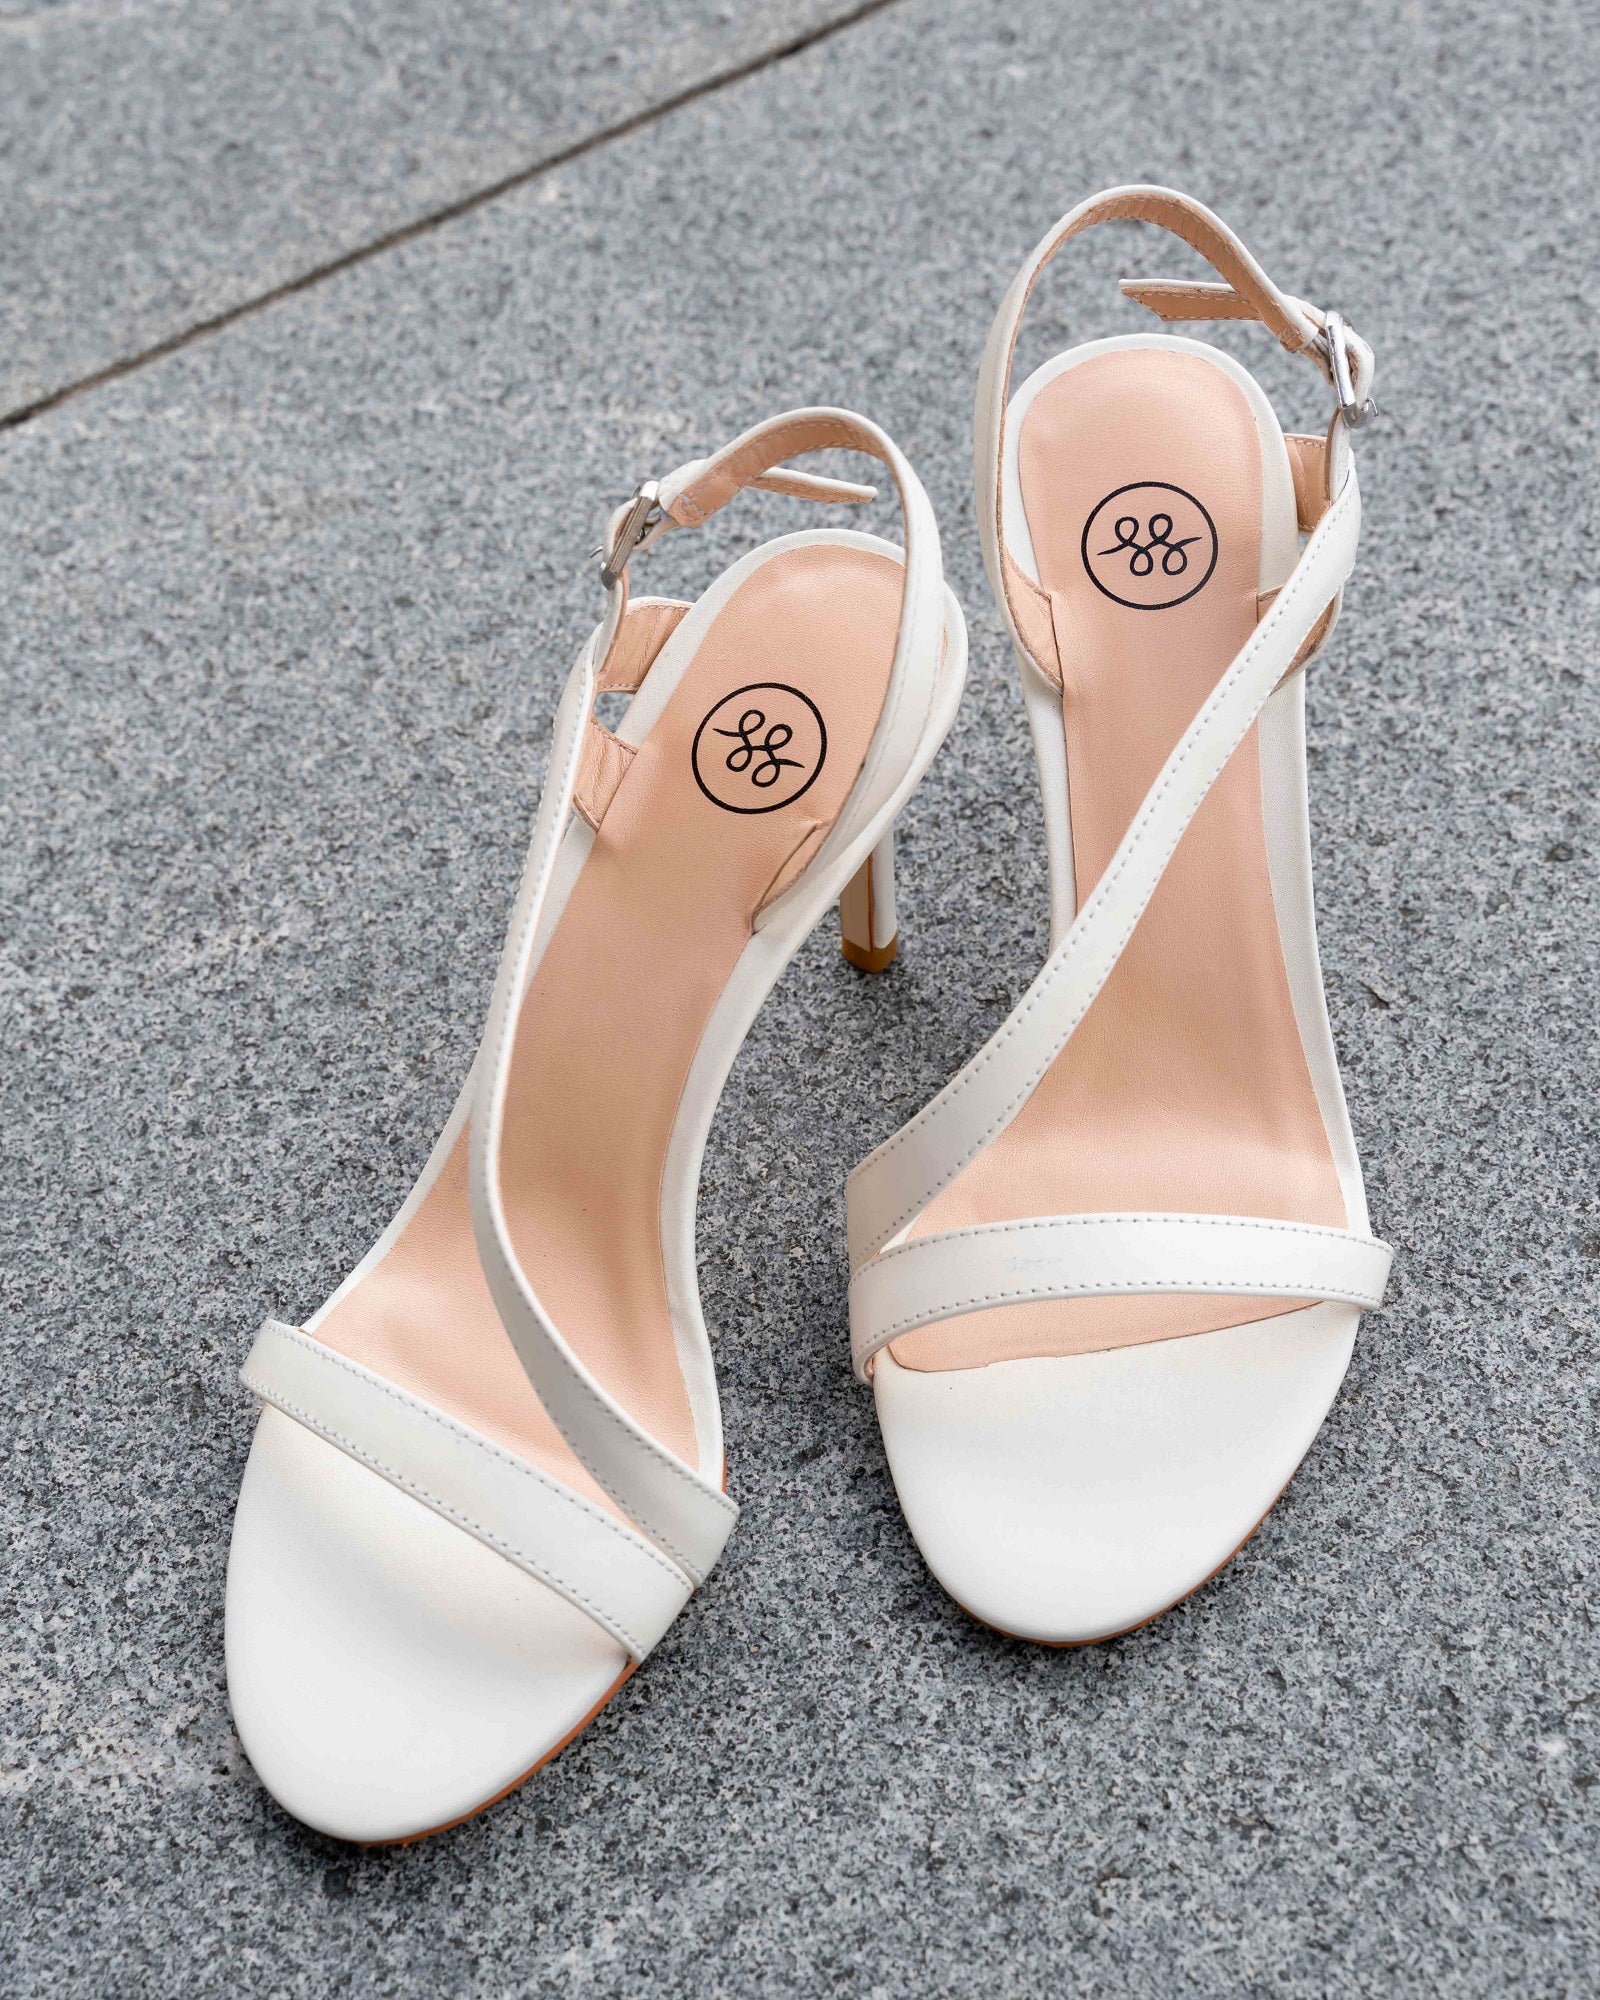 Ariana Strappy Sandal White Heels by Sole Shoes NZ H18-36